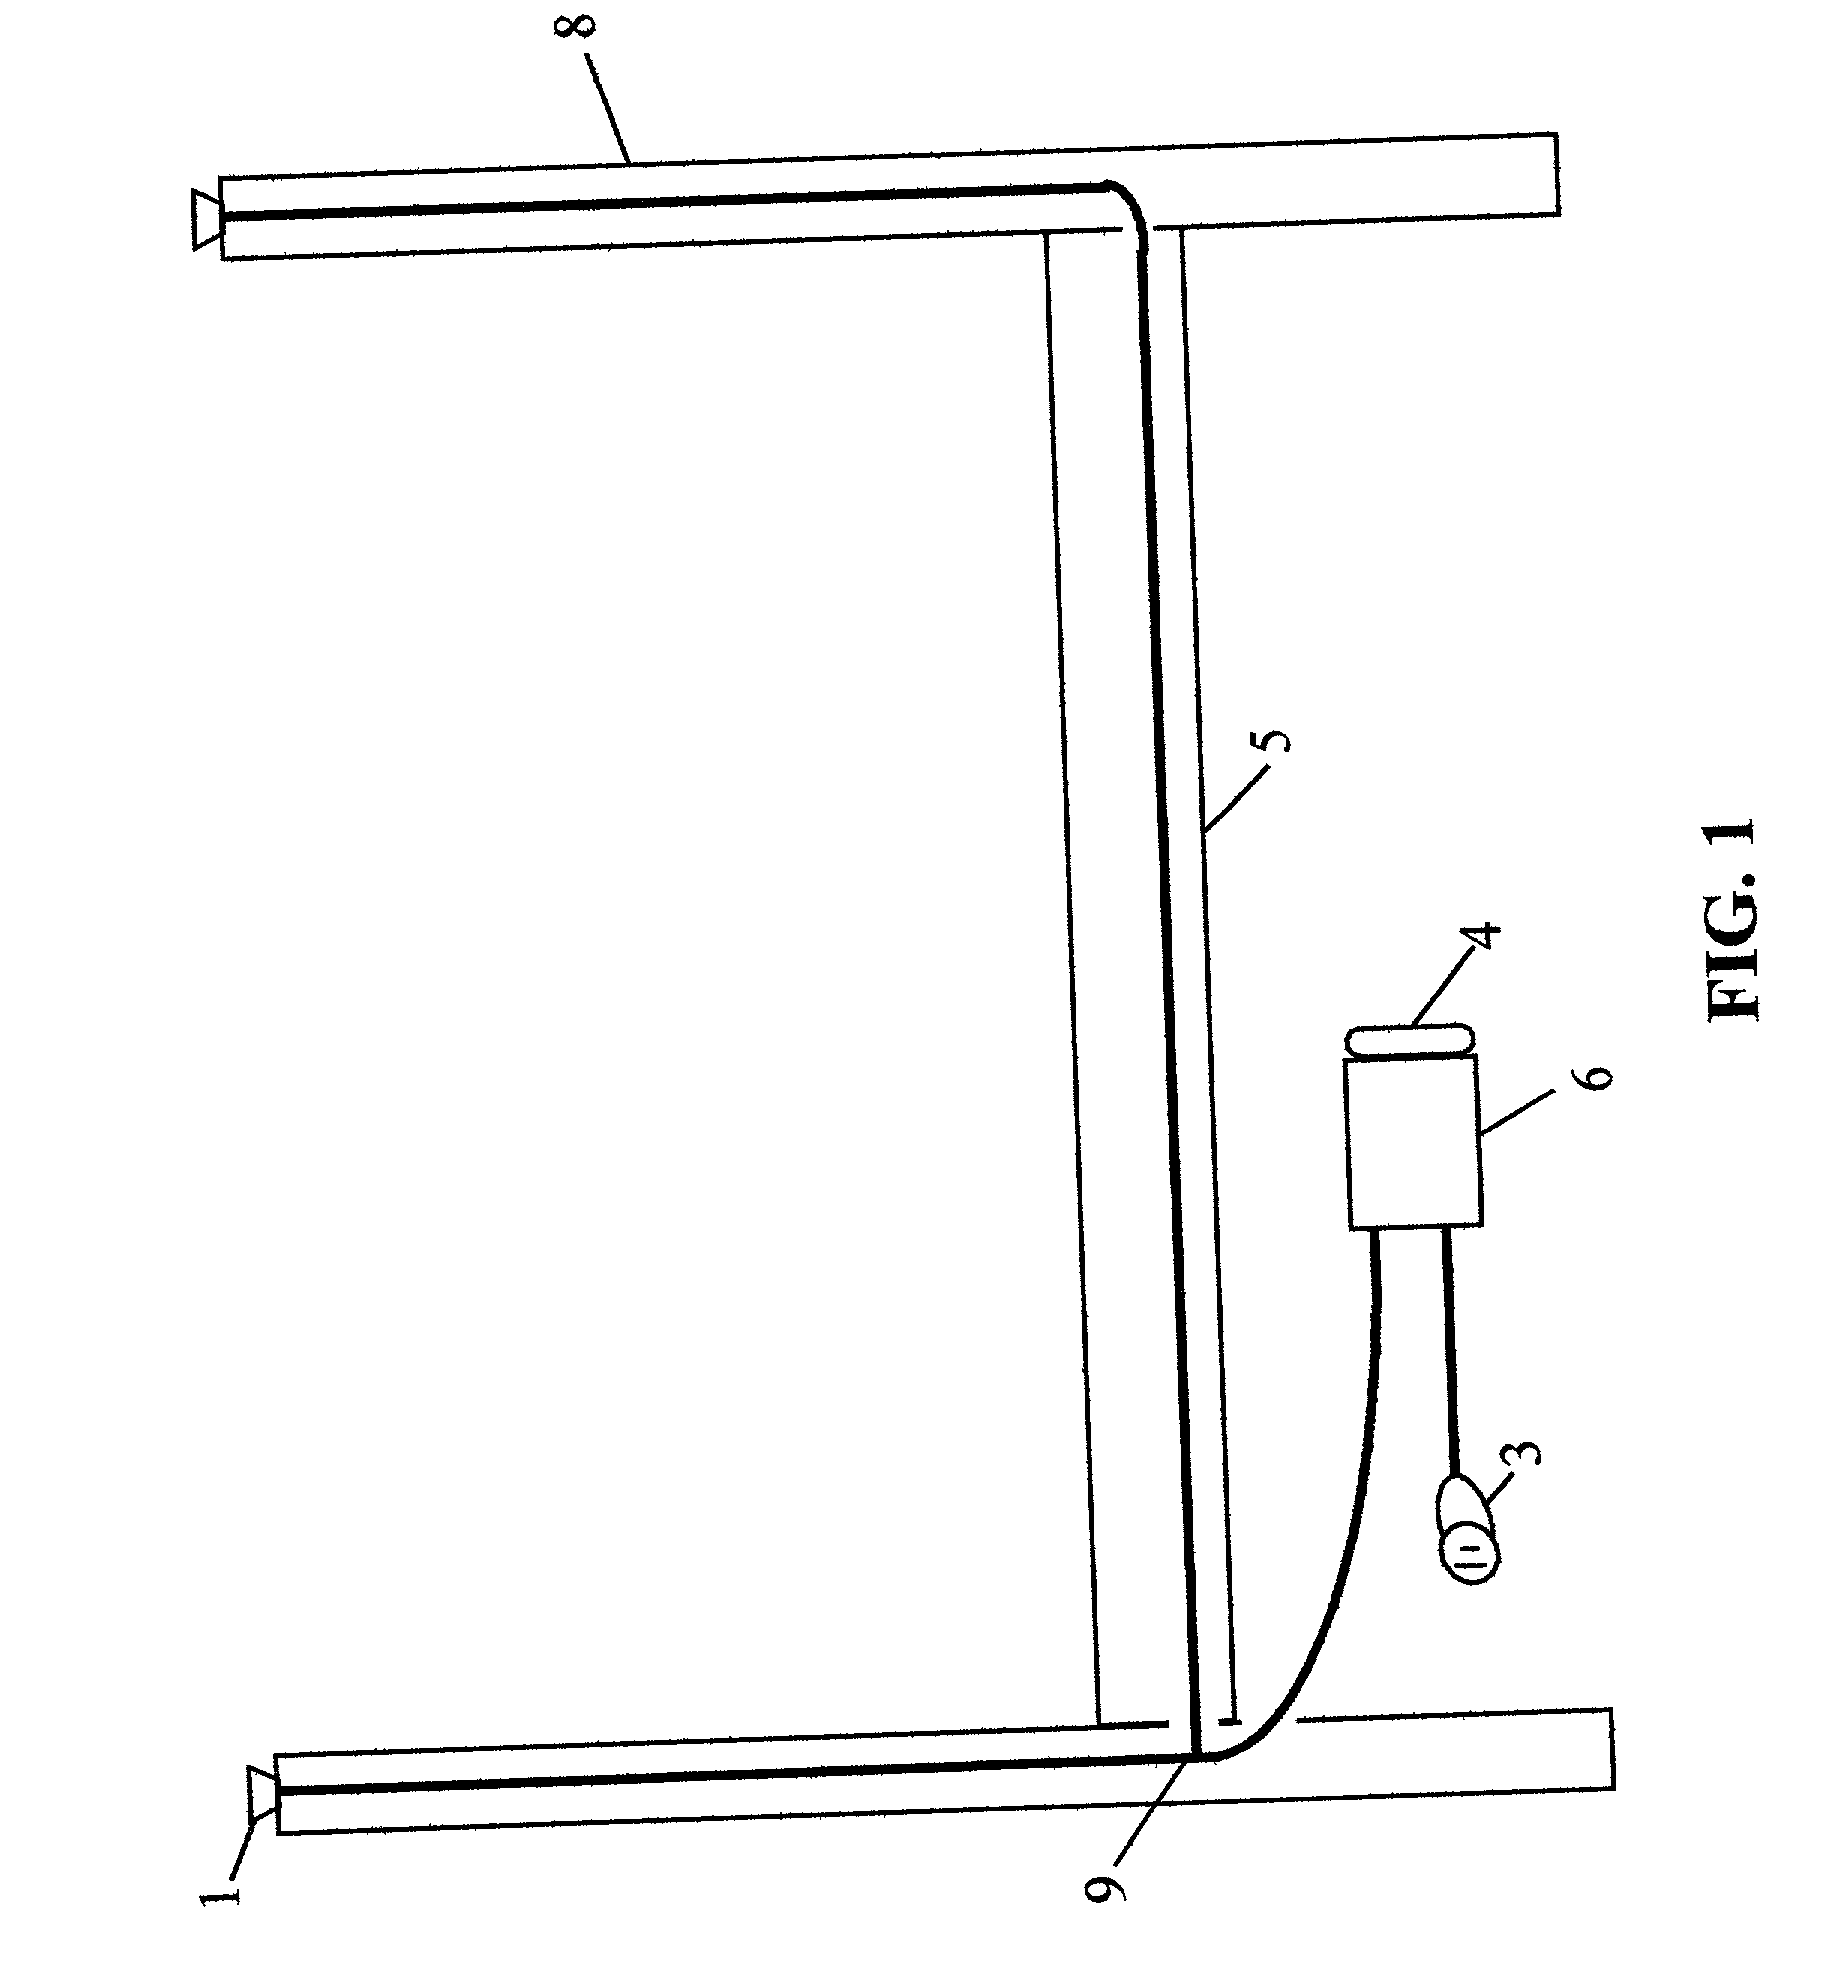 Multifunctional illumination system for furniture, and a bedstead of tubular construction employing this device